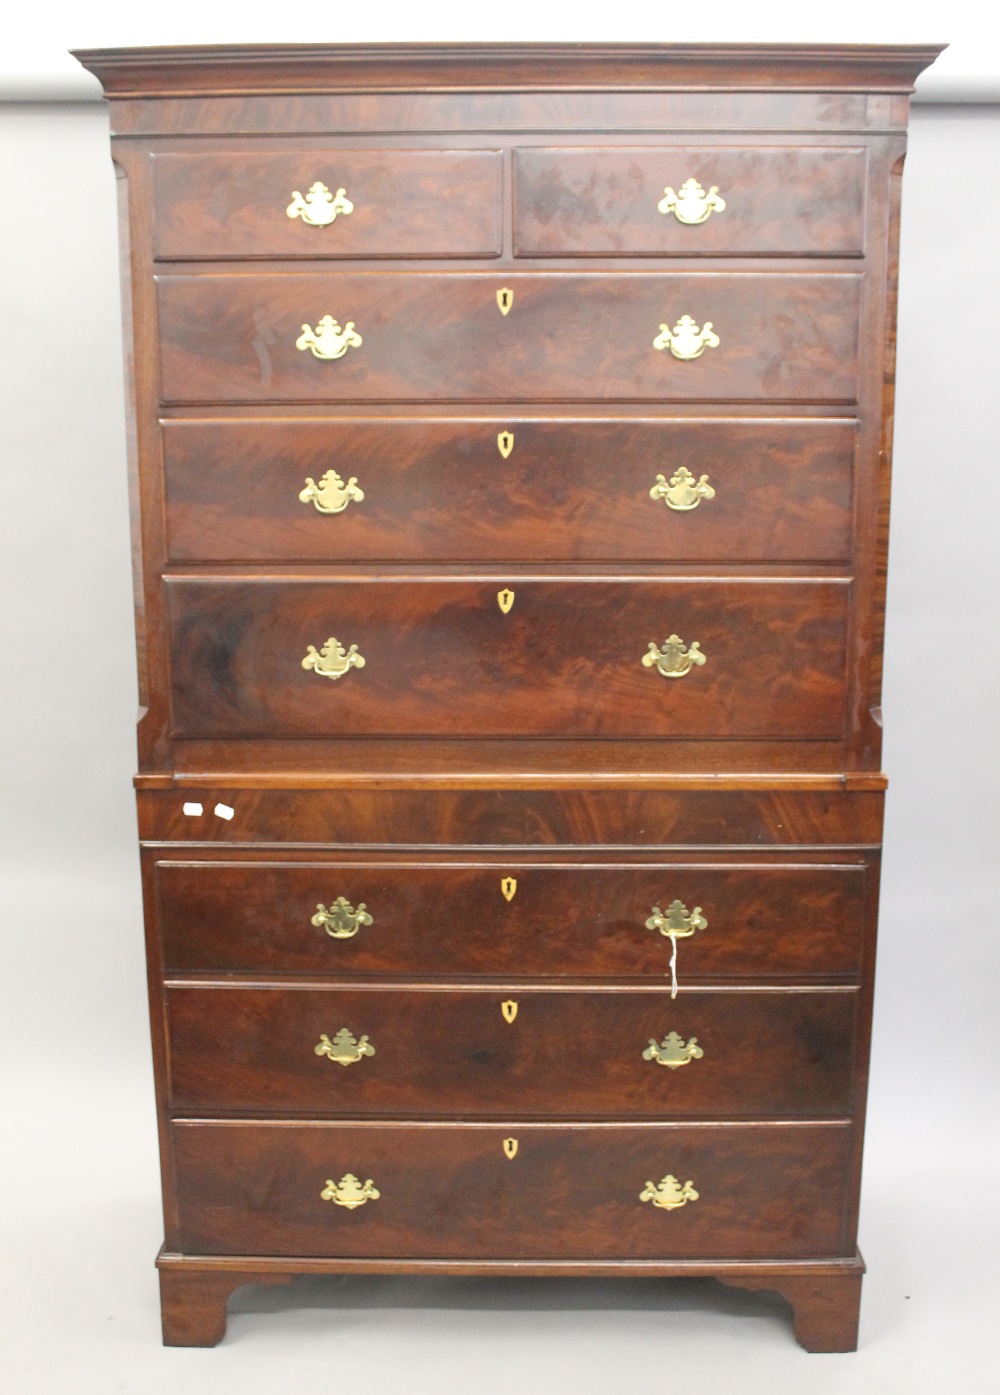 WITHDRAWN A 19th century mahogany chest on chest. 191 cm high x 115.5 cm wide. - Image 2 of 5